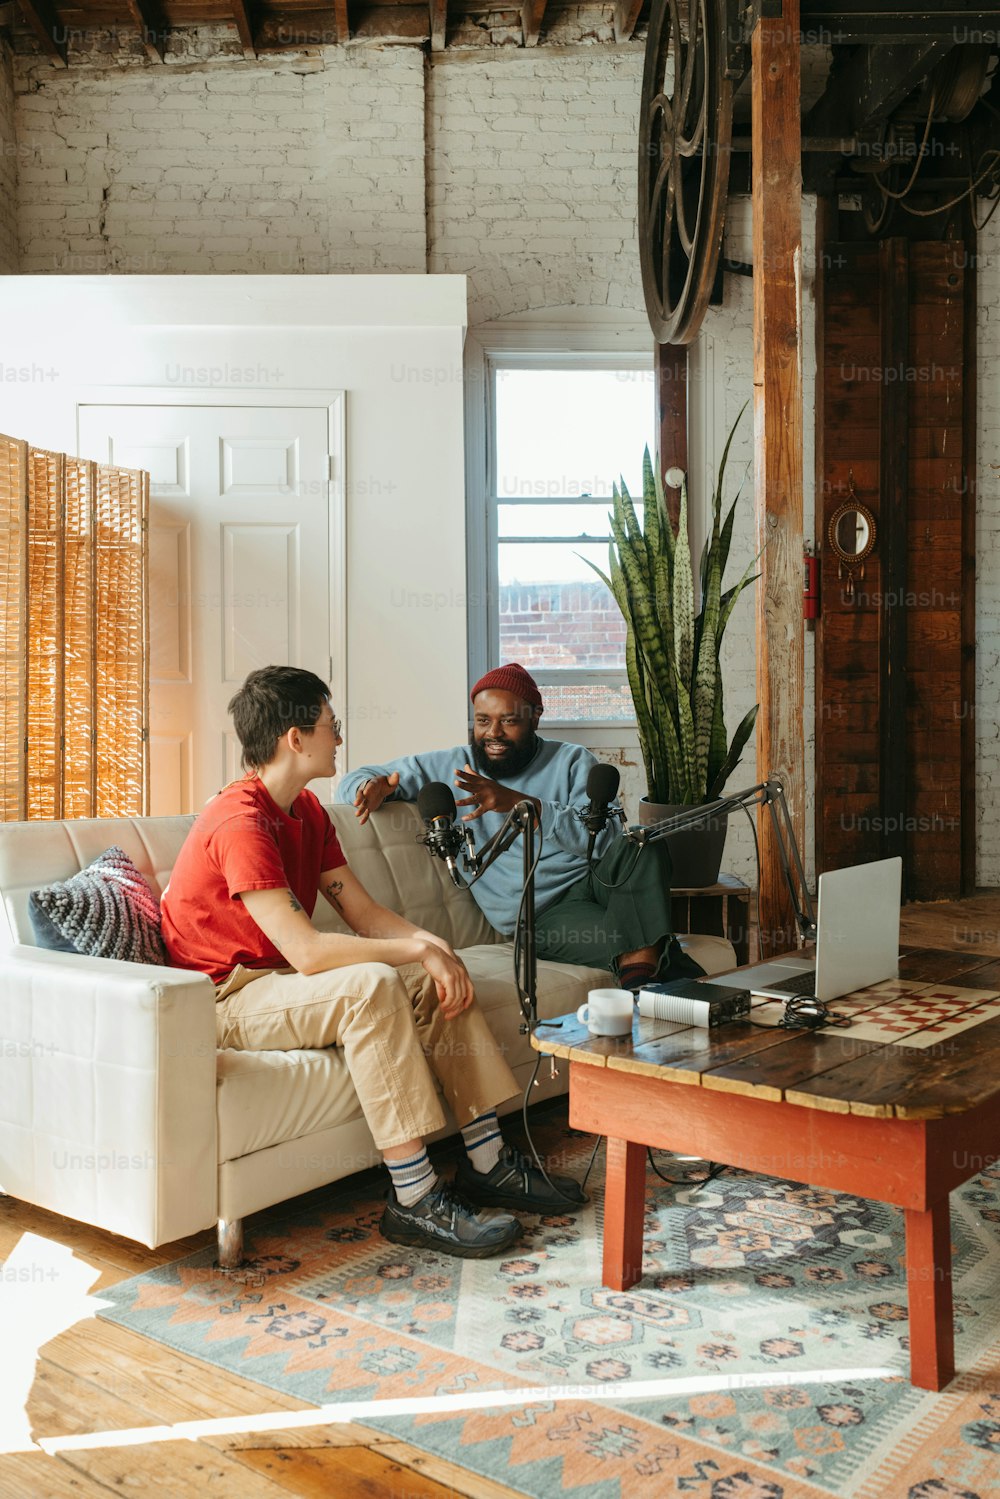 a man and a woman sitting on a couch in a living room